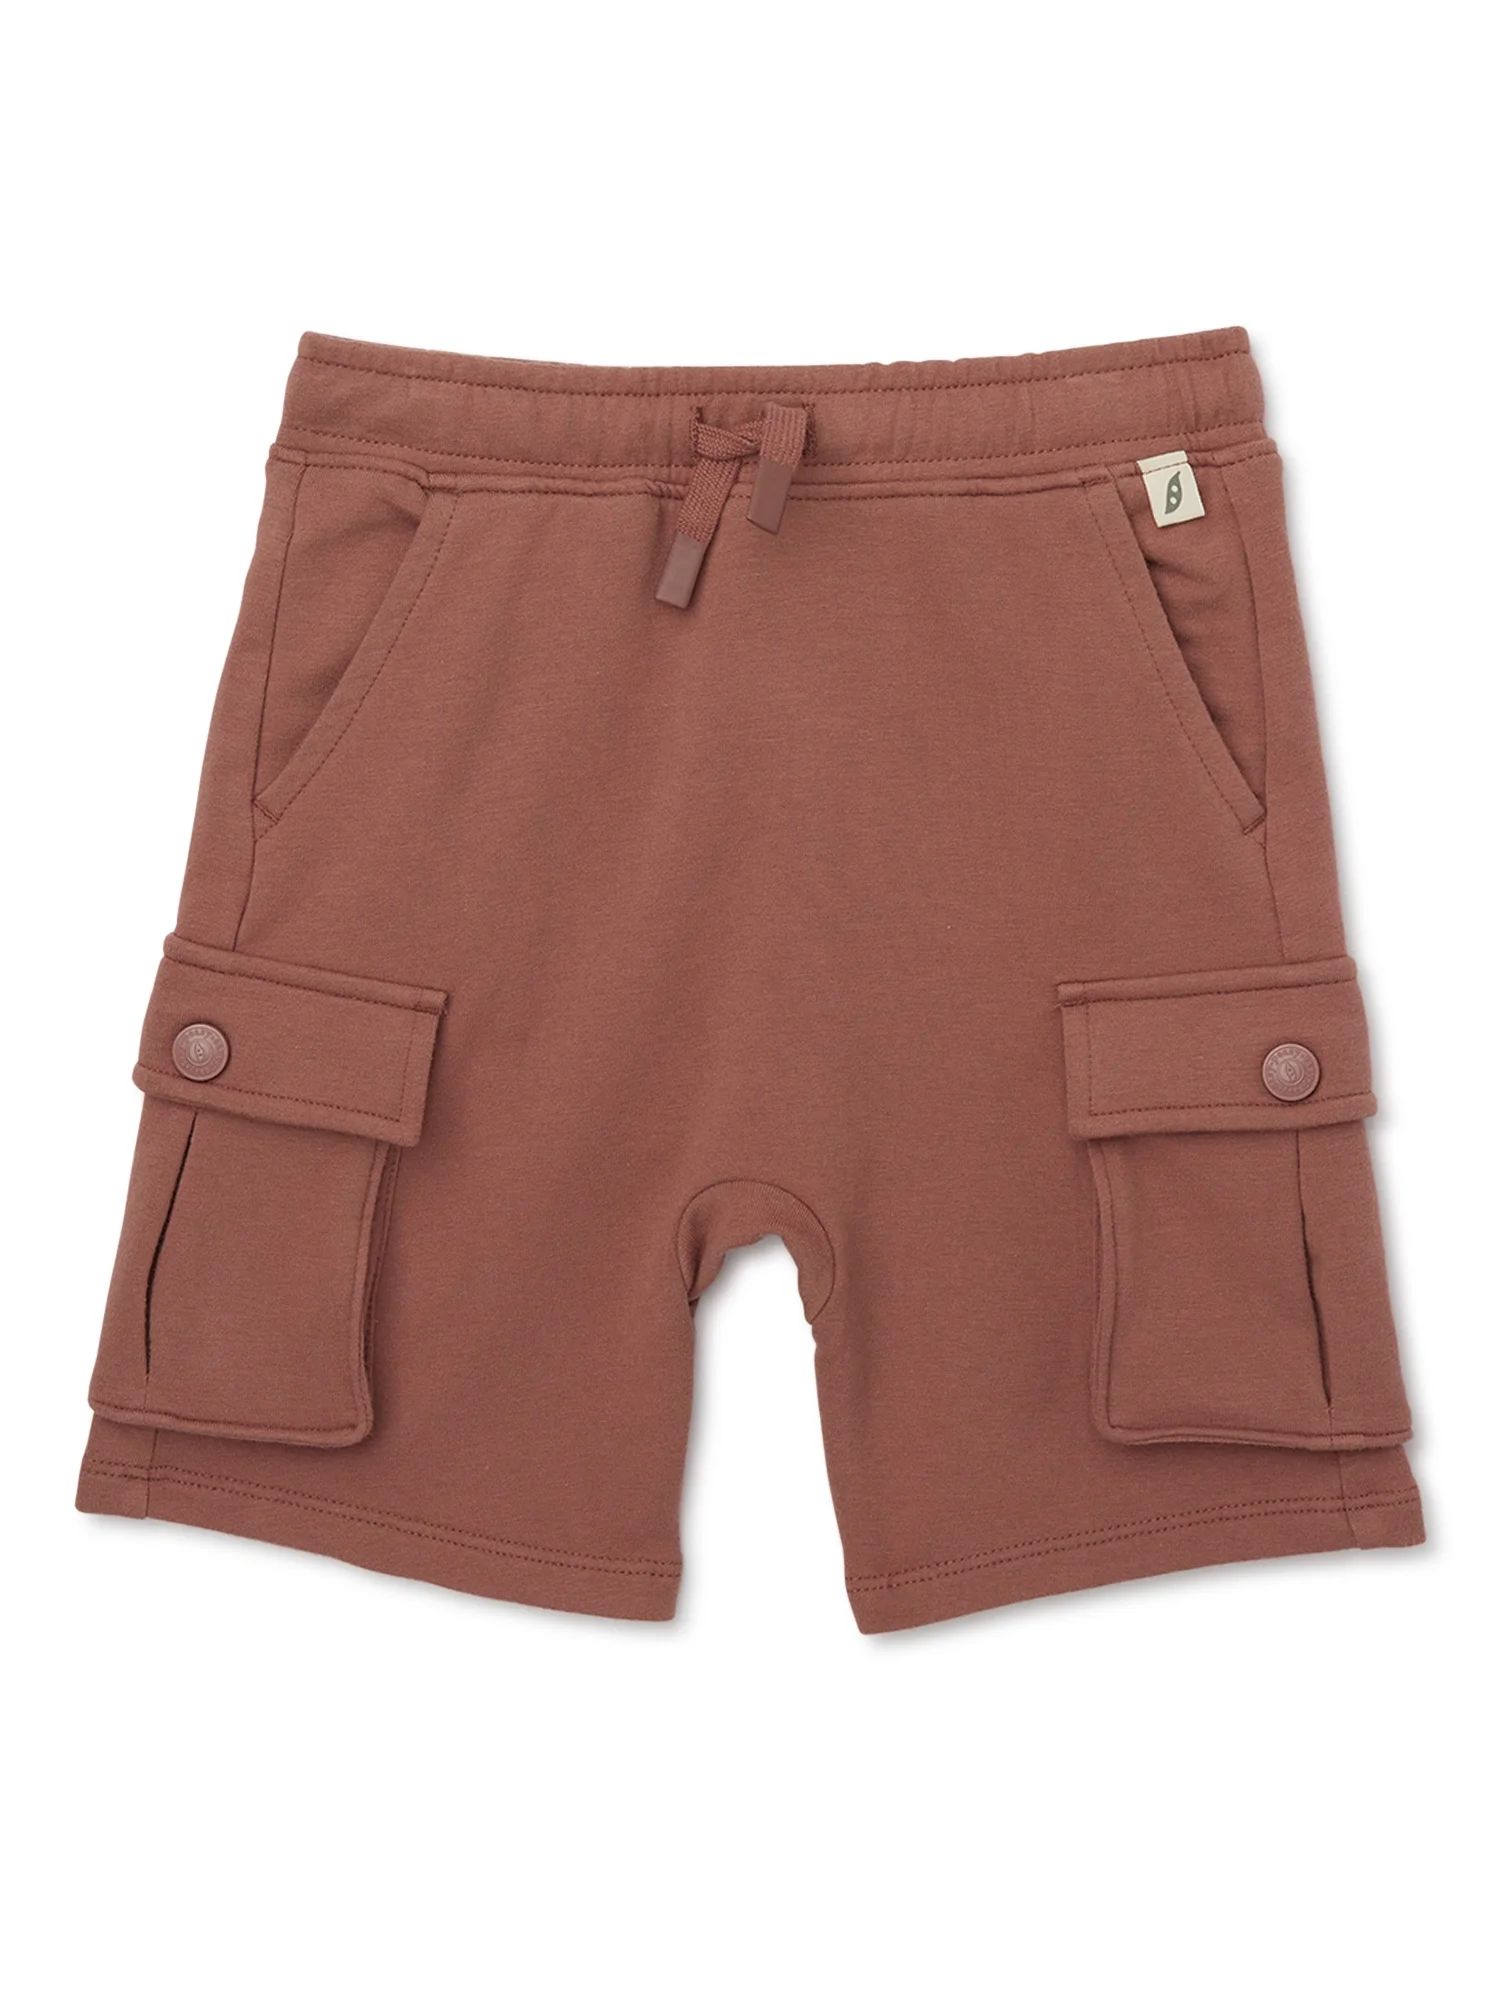 Easy-peasy Toddler Boy French Terry Cargo Shorts, Sizes 18M-5T | Walmart (US)